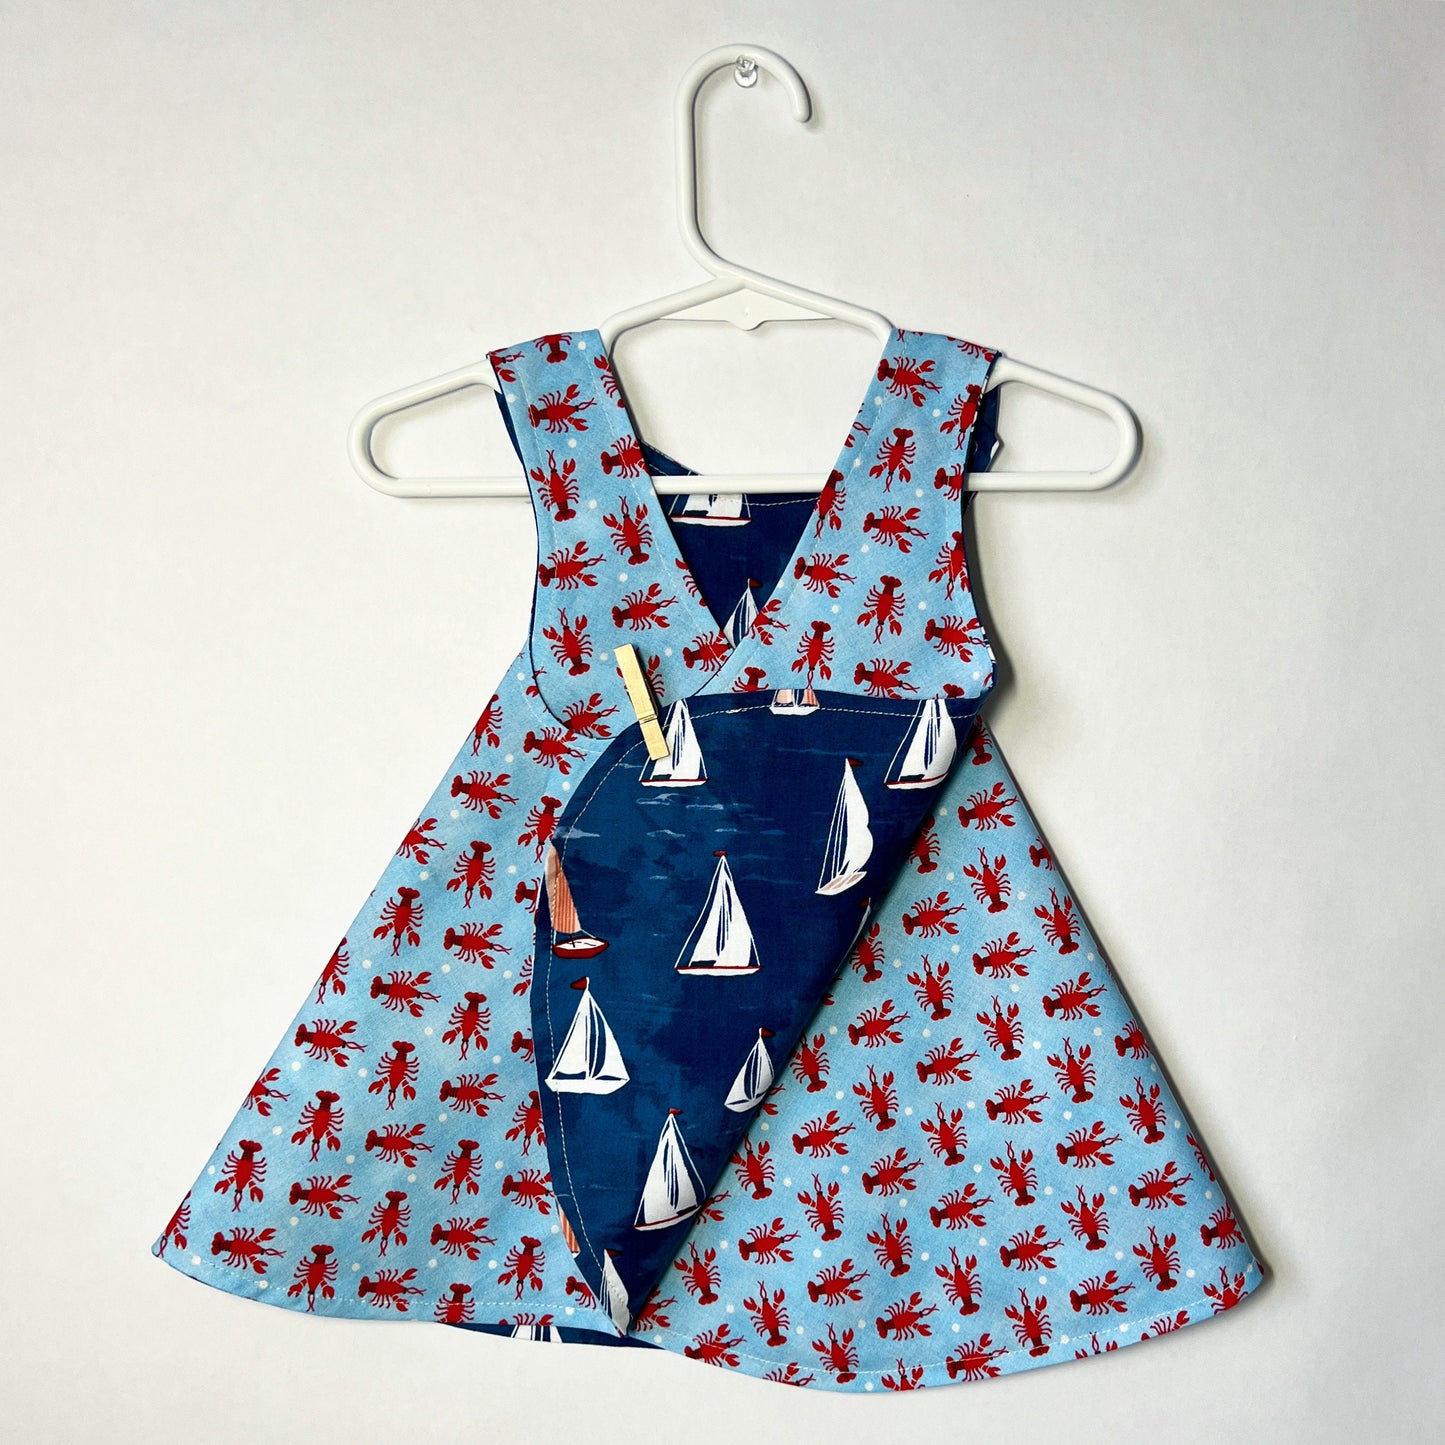 Reversible cotton dress “Lobster and Sailboats”